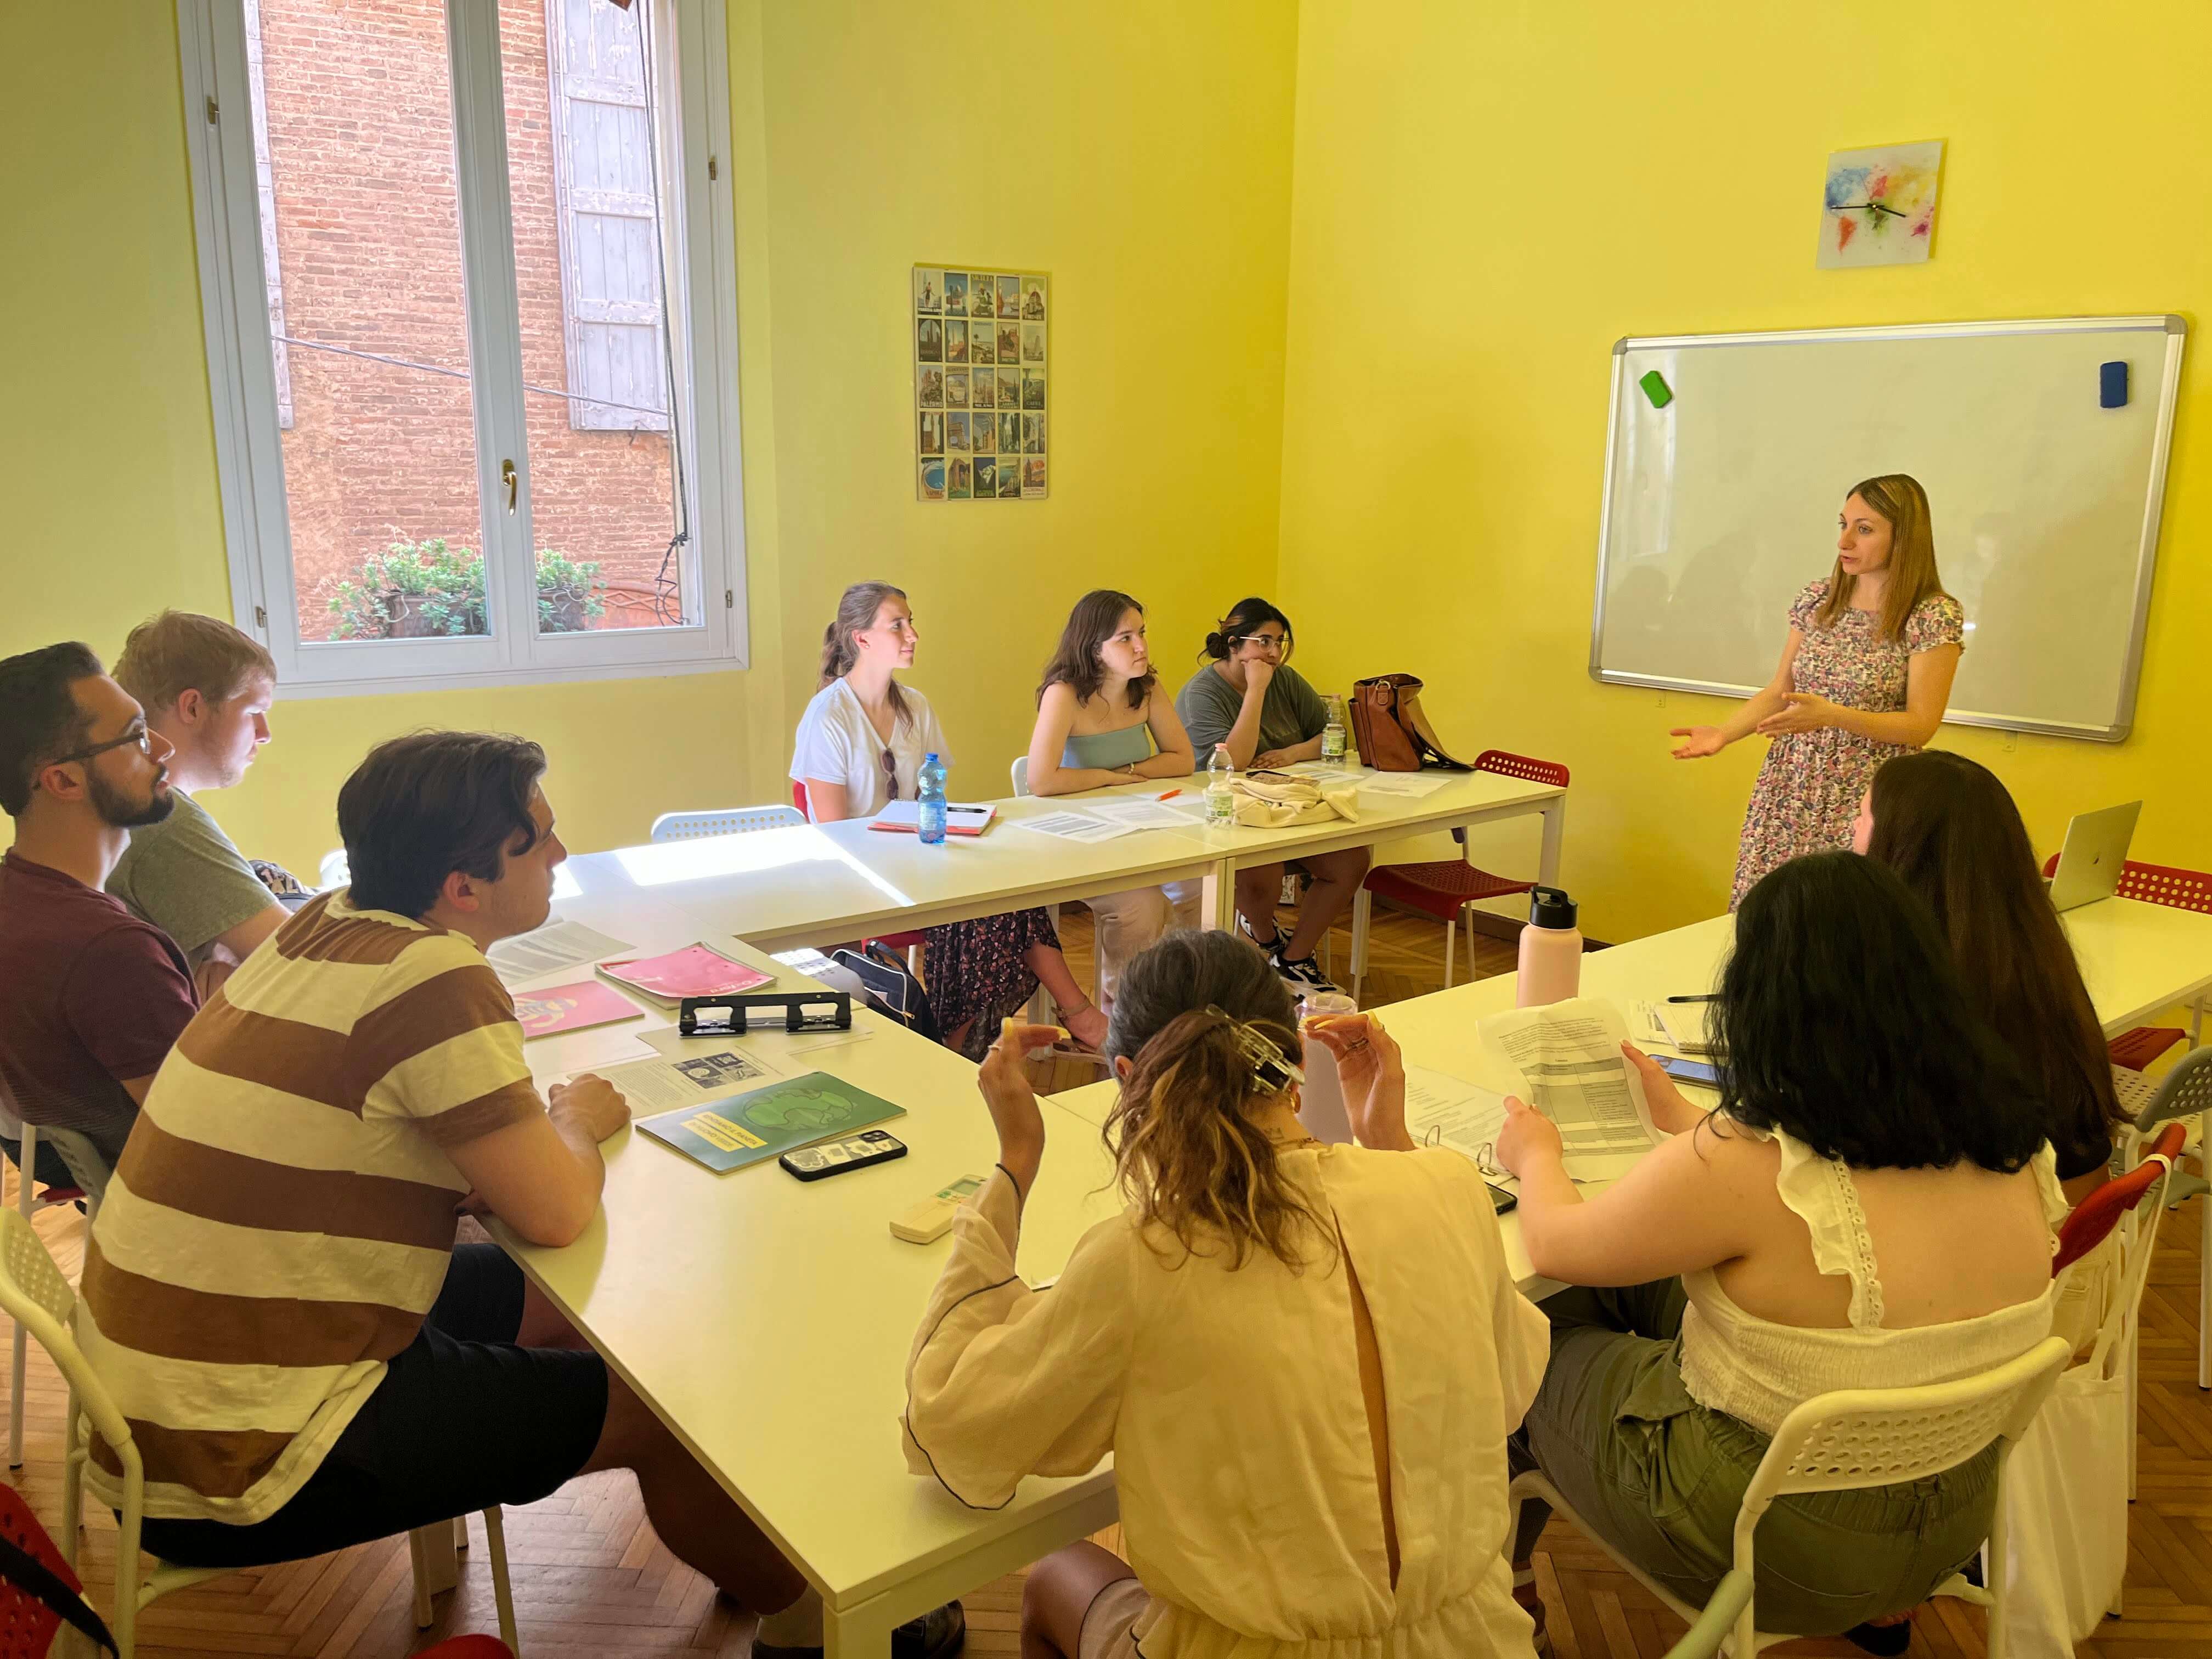 Students on a classroom in Bologna, Italy